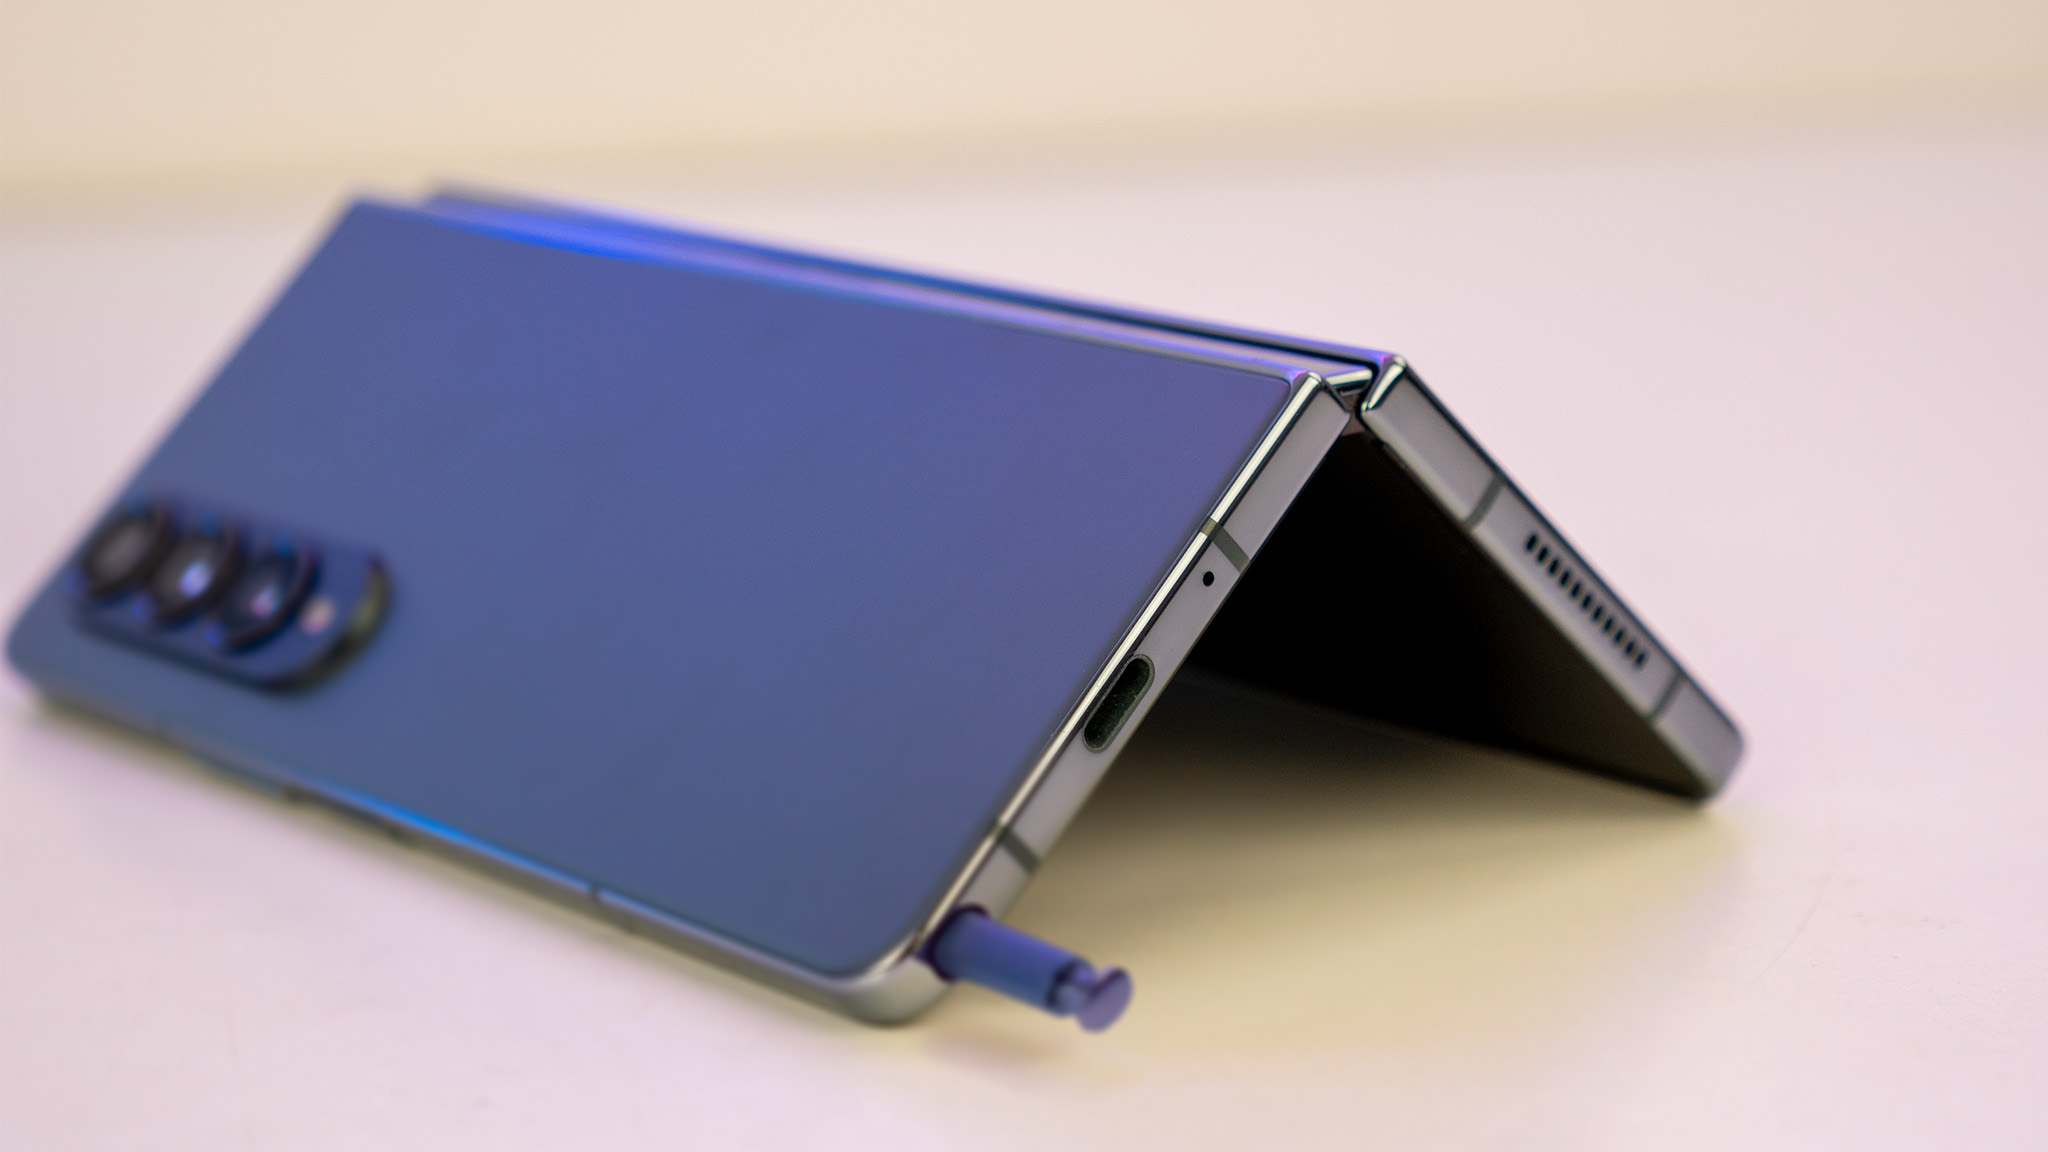 A mockup of what the Samsung Galaxy Z Fold 5 might look like if it had a built-in S Pen